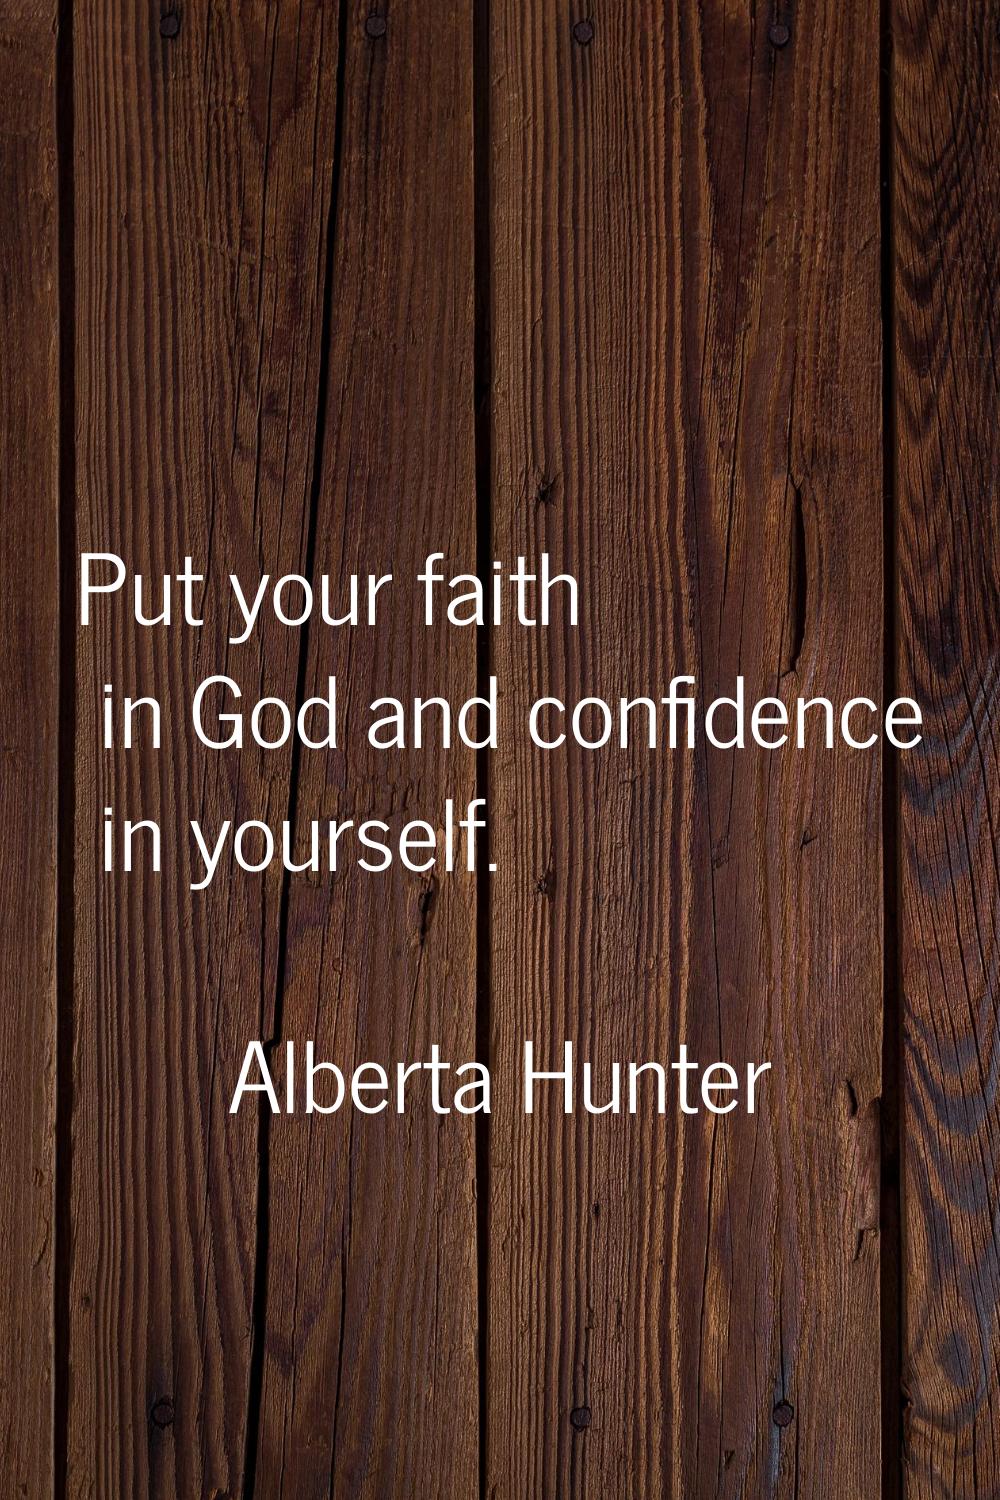 Put your faith in God and confidence in yourself.